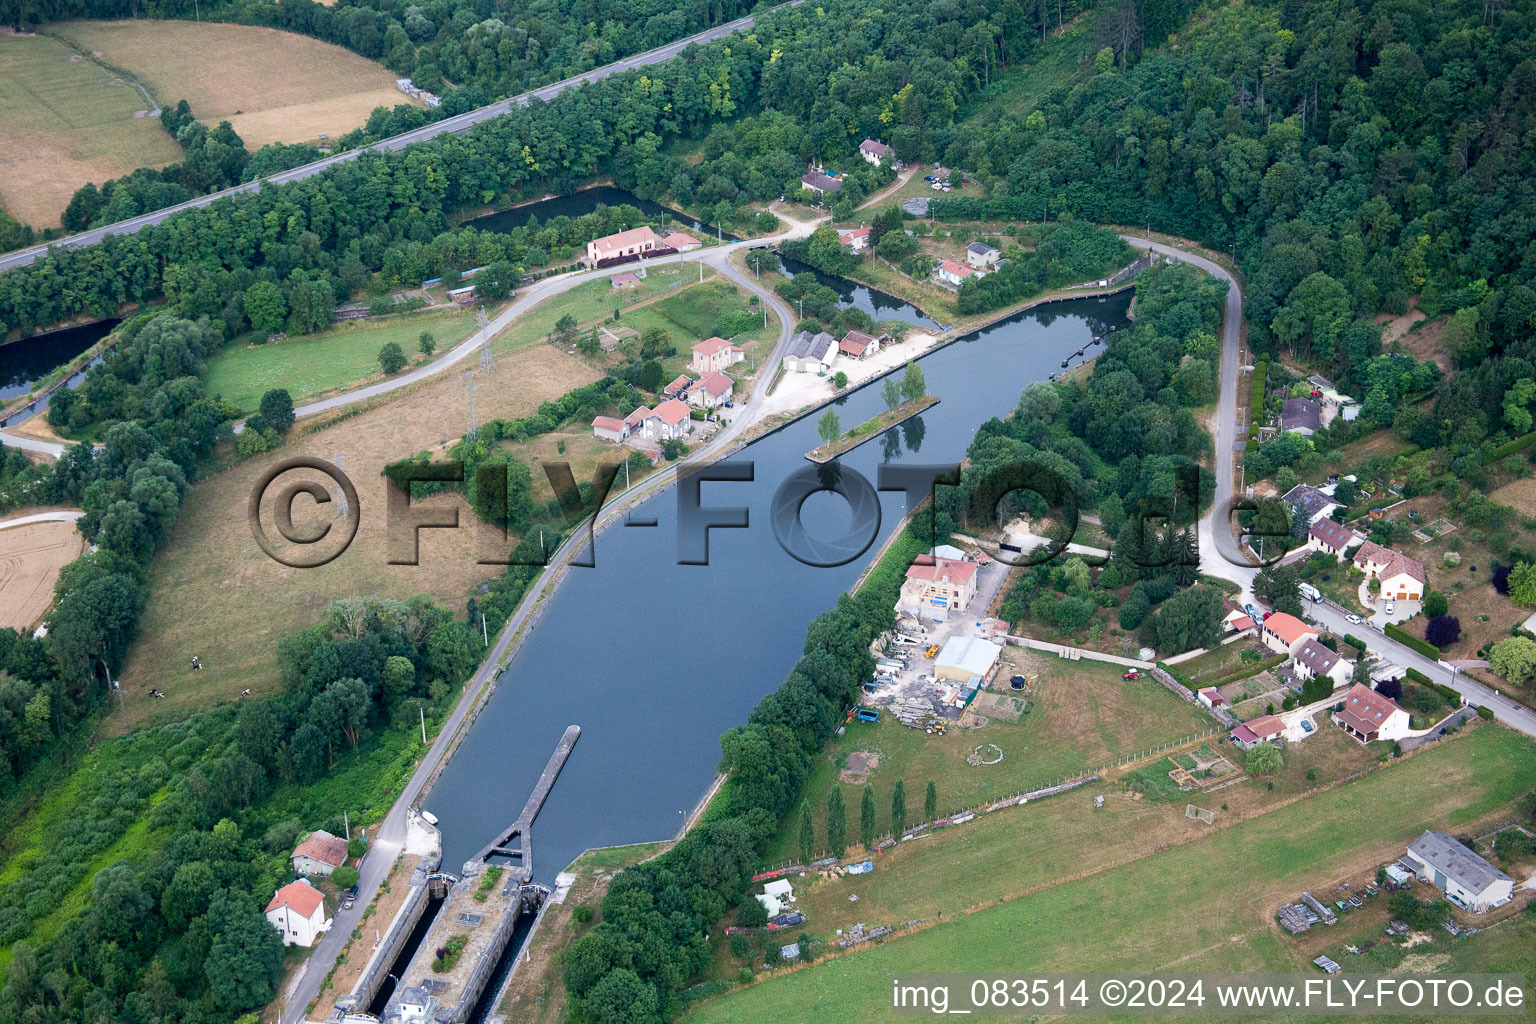 Channel flow through tunnel and river banks of the waterway shipping Rhine to Marne channel in Foug in Grand Est, France